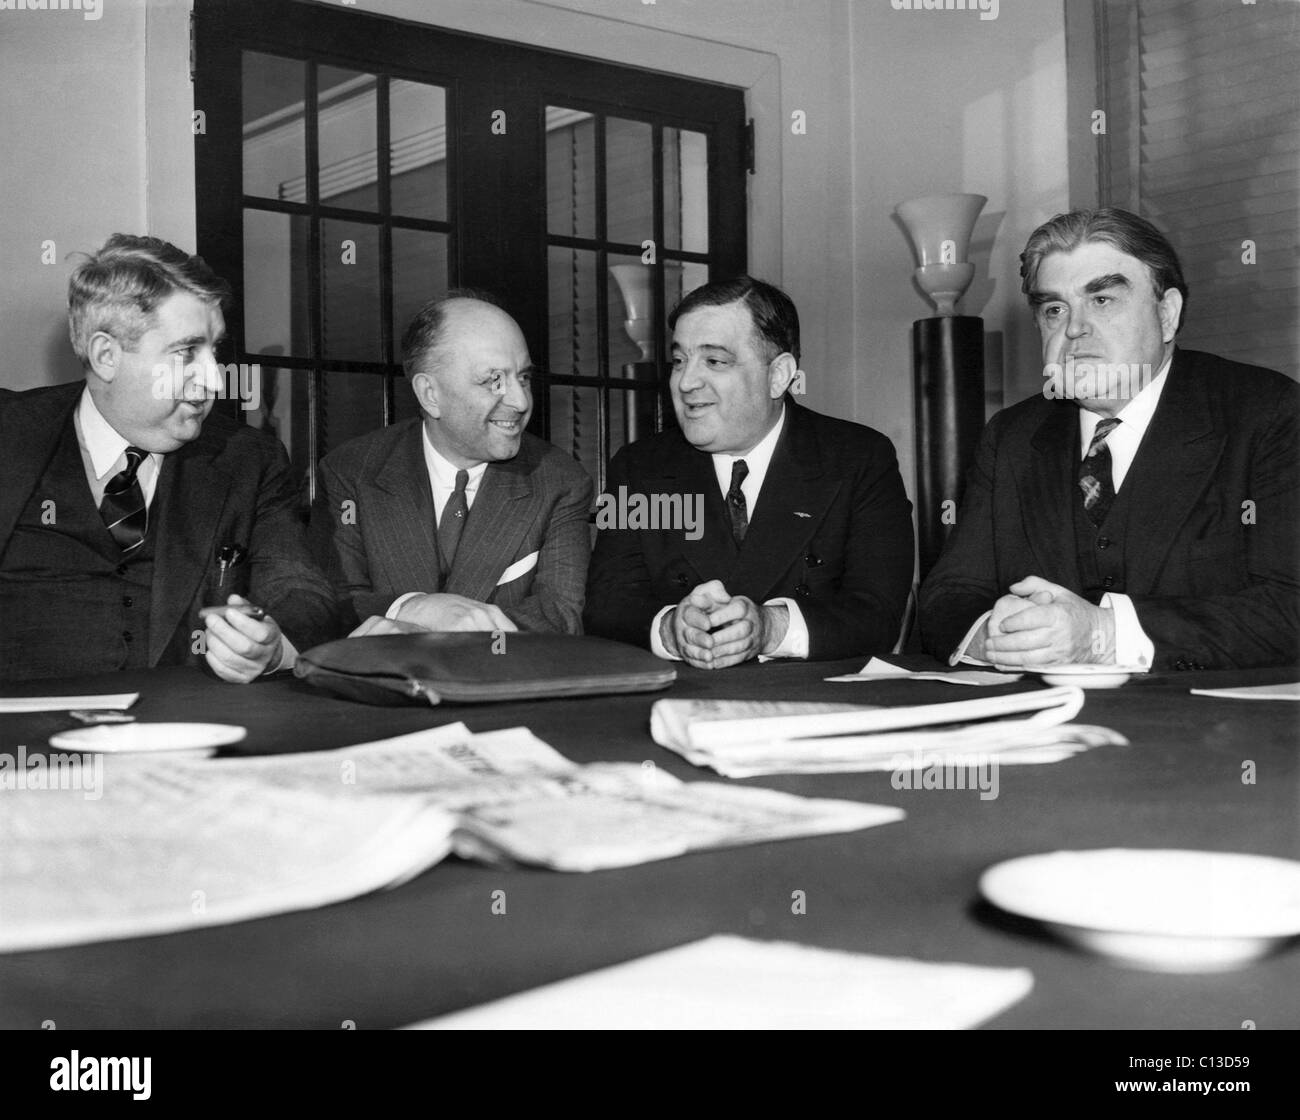 New York Mayor Fiorello LaGuardia urges coal miners and operators to negotiate a speedy settlement of a new union contract to avert a coal shortage in New York City. From left: management spokesman Charles O'Neill, conference chairman Walter Robison, LaGuardia, United Mine Workers and C.I.O. head John L. Lewis, New York City, April 13, 1939 Stock Photo